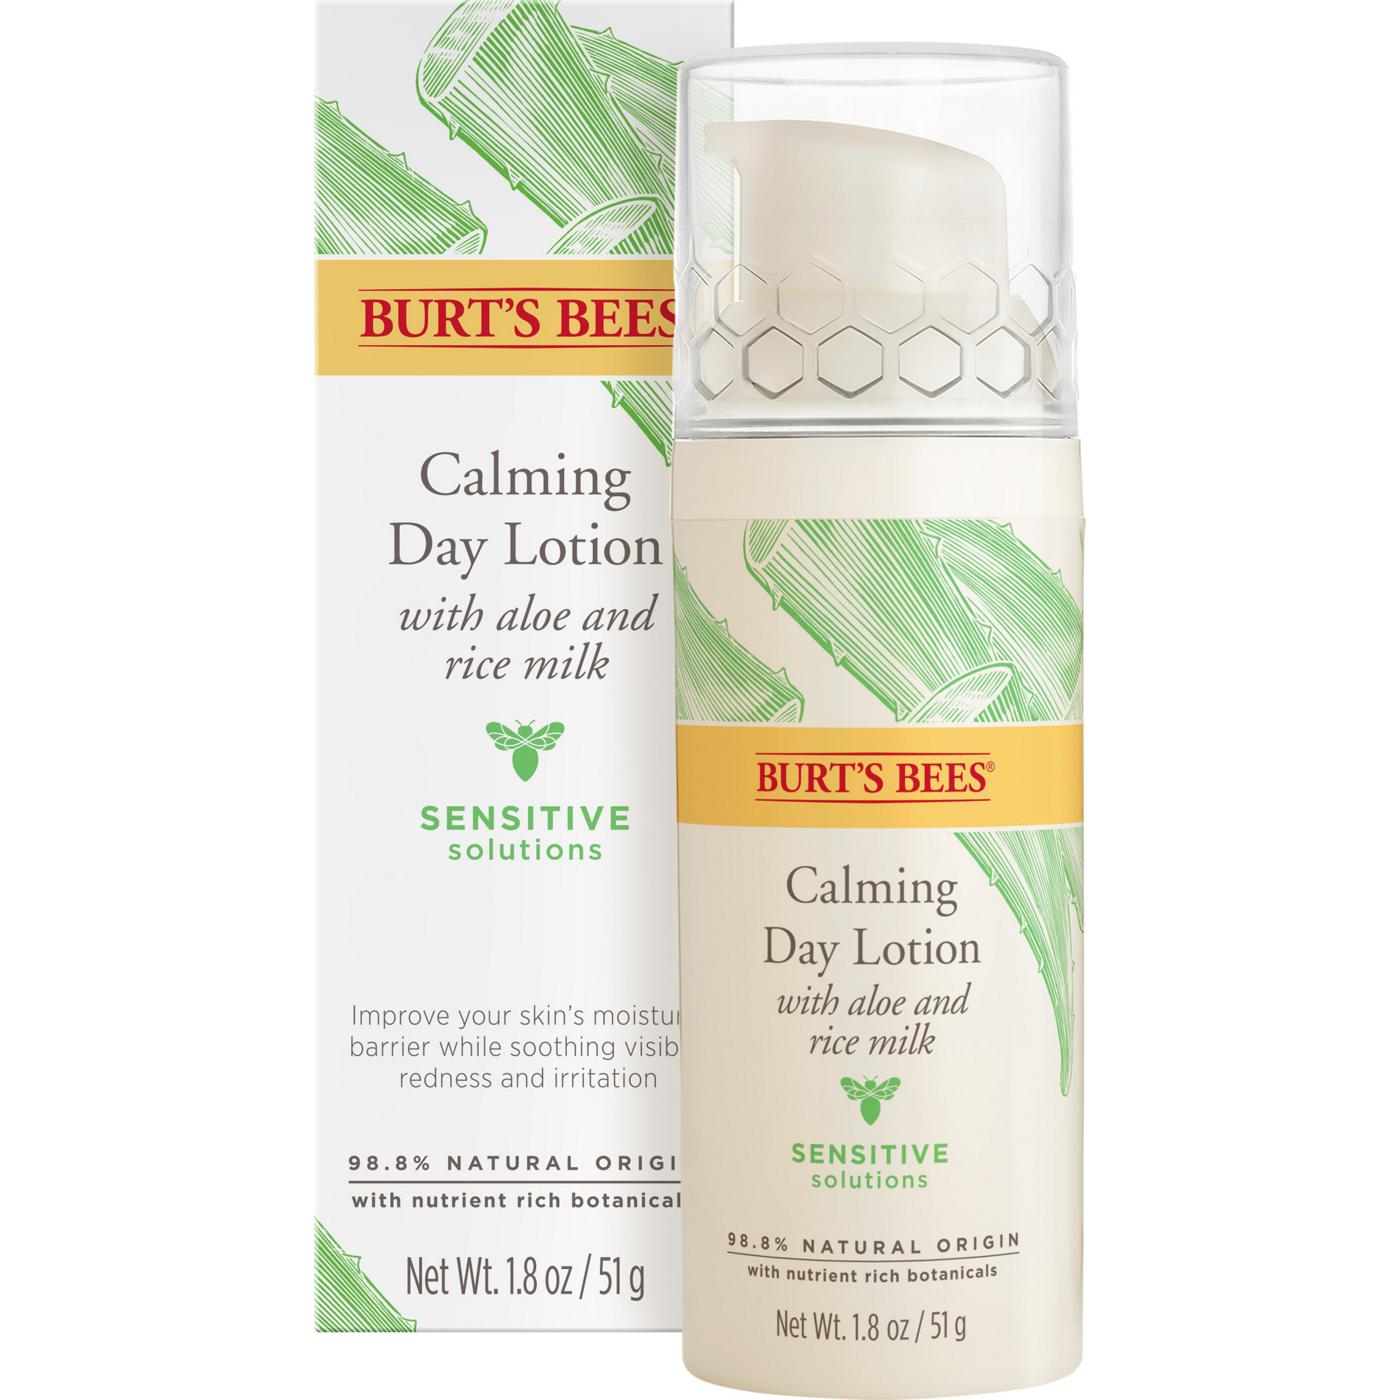 Burt's Bees Sensitive Solutions Calming Day Lotion; image 3 of 5